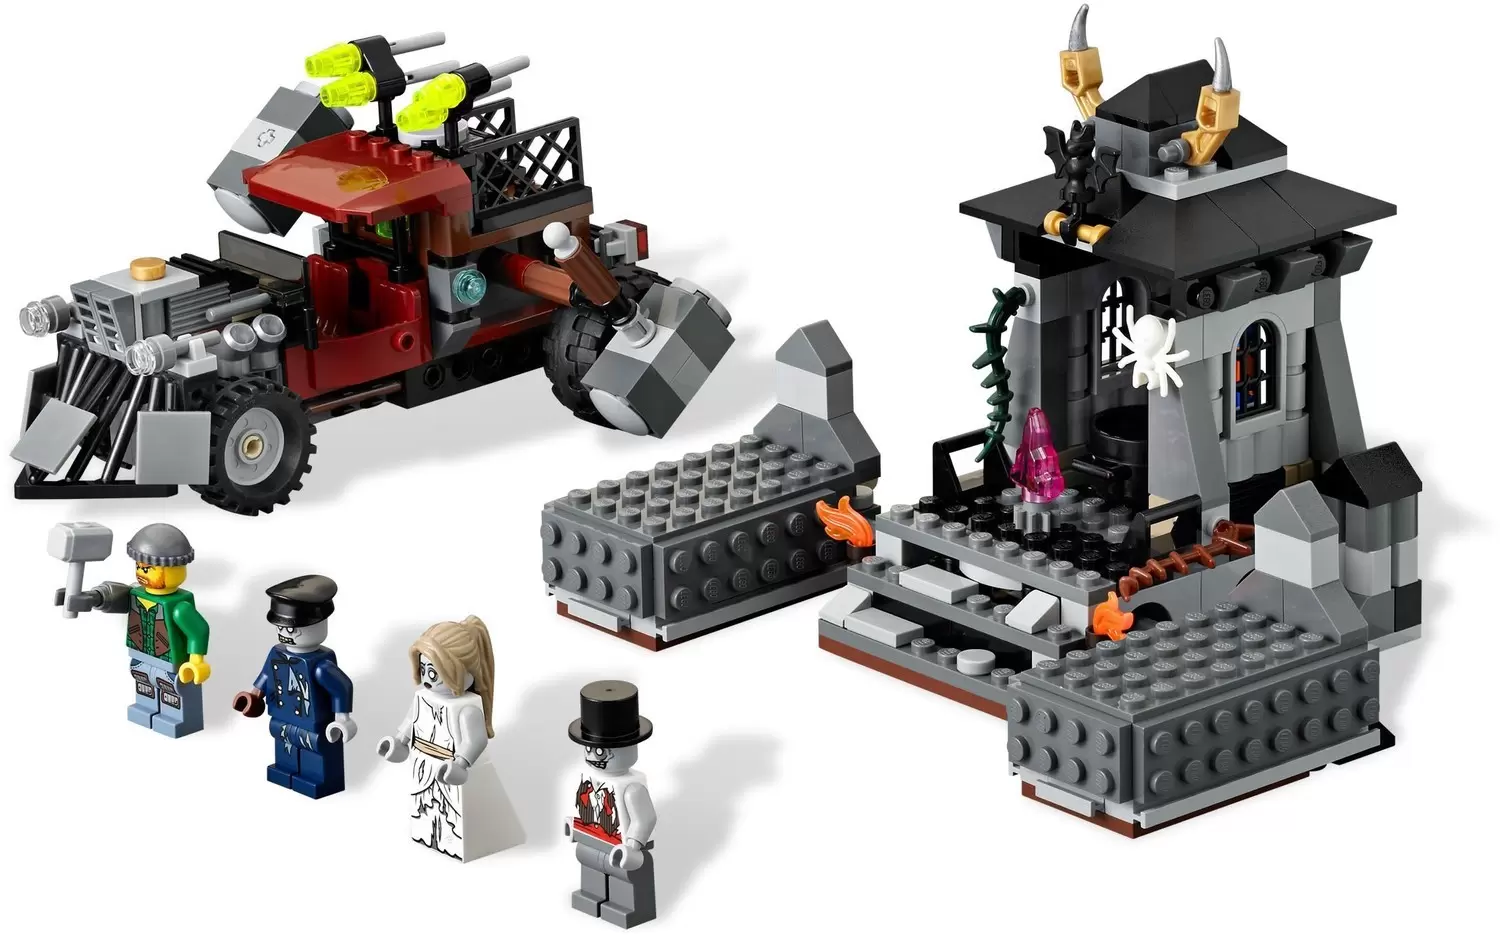 LEGO Monster Fighters - The Zombies